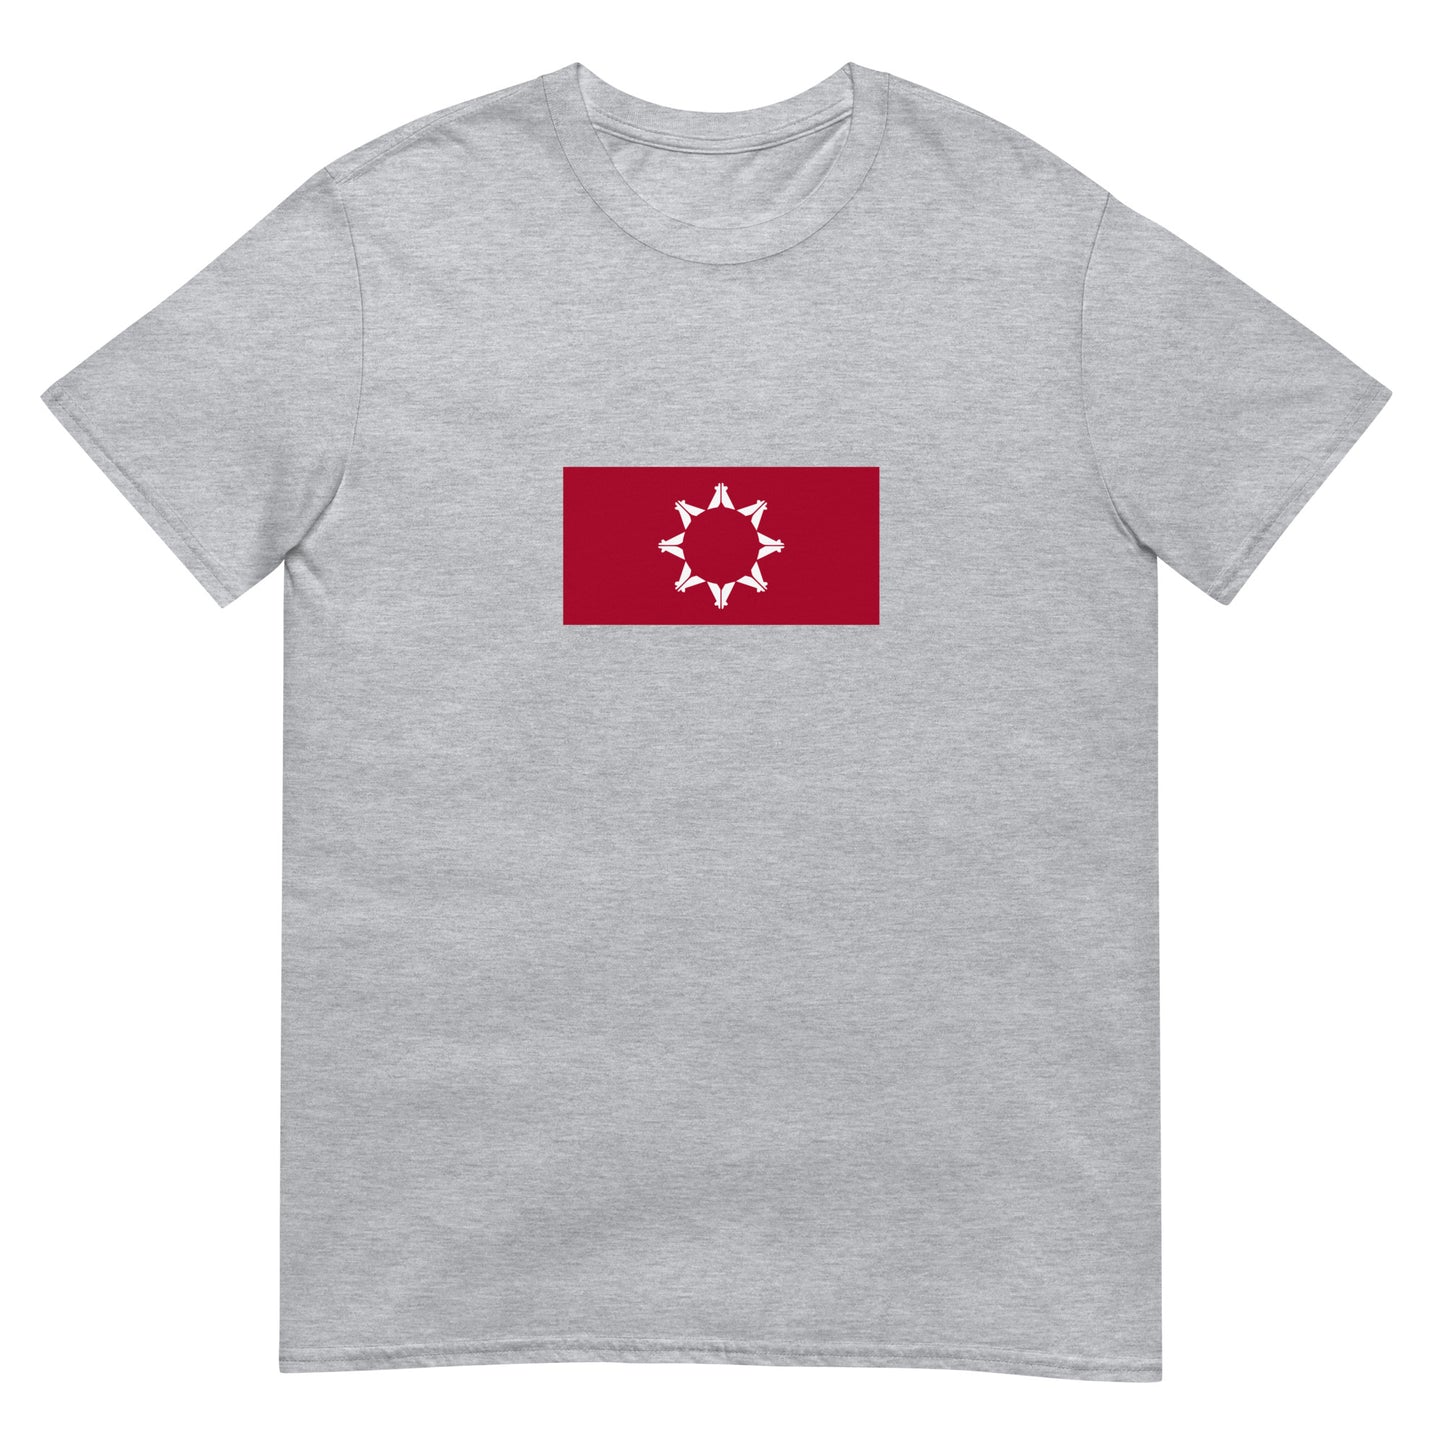 USA - Sioux people | Native American Flag Interactive T-shirt